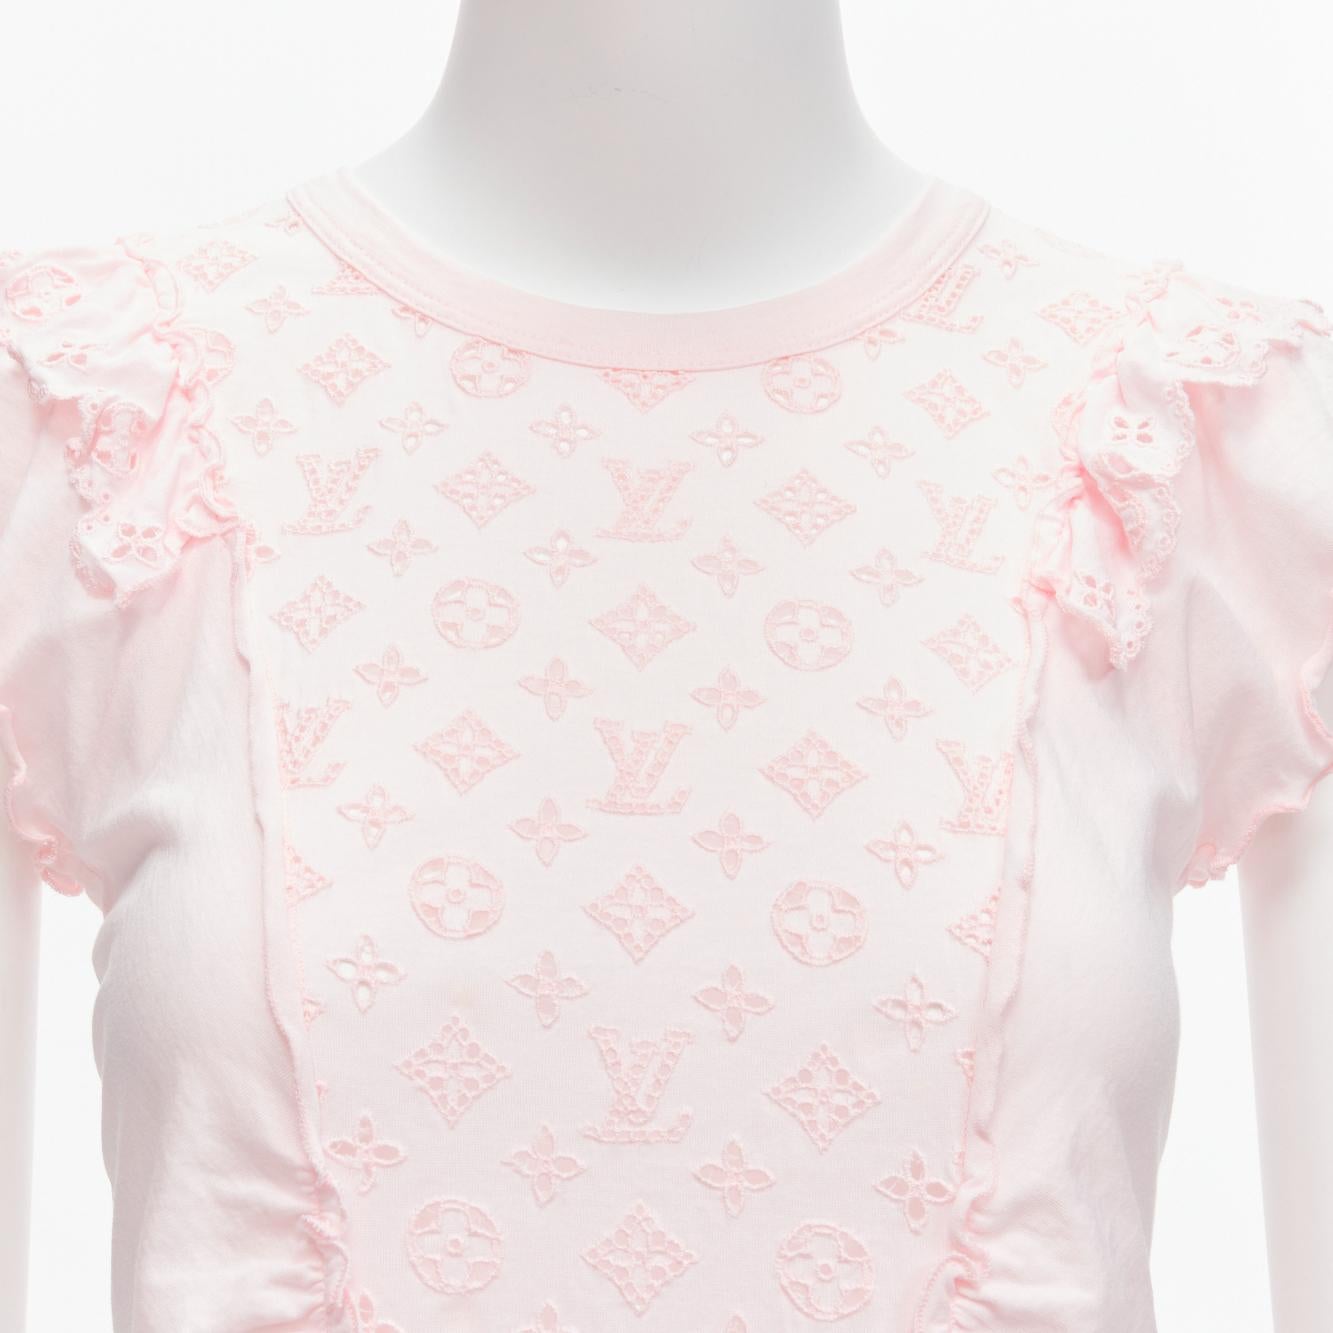 LOUIS VUITTON pink LV logo monogram eyelet lace panel ruffle cape sleeves tshirt top M
Reference: TGAS/D00312
Brand: Louis Vuitton
Material: Cotton
Color: Pink
Pattern: Monogram
Closure: Pullover
Extra Details: Gathers at waist creates interesting